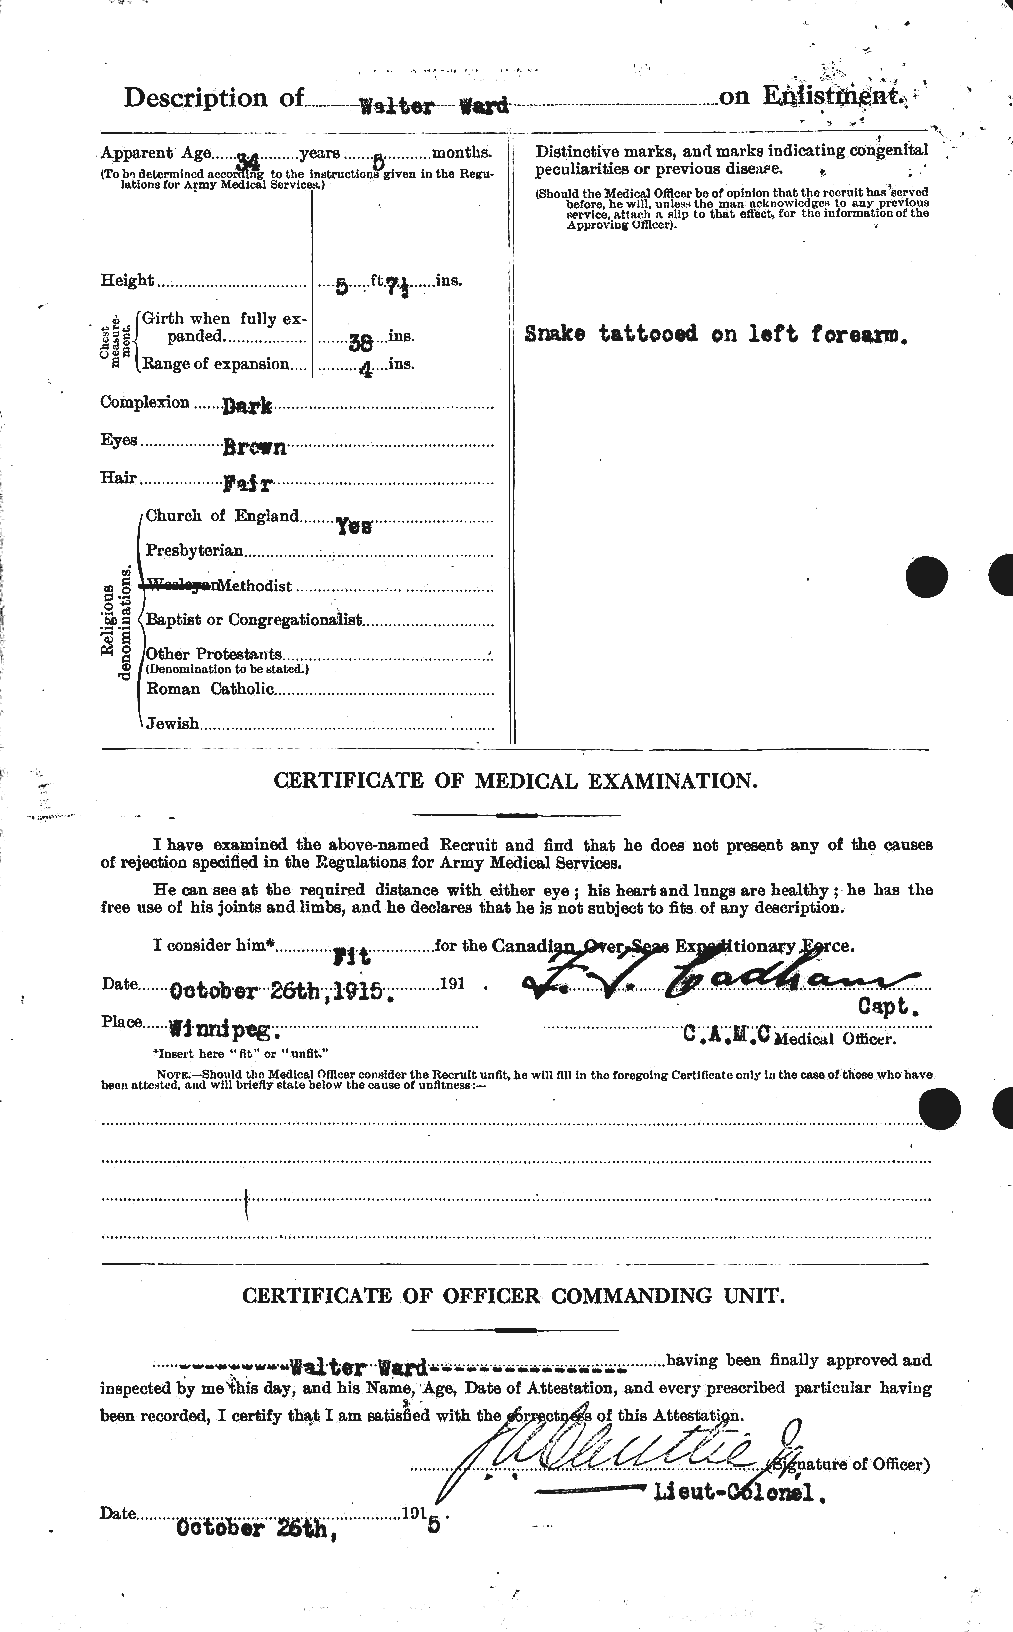 Personnel Records of the First World War - CEF 659752b